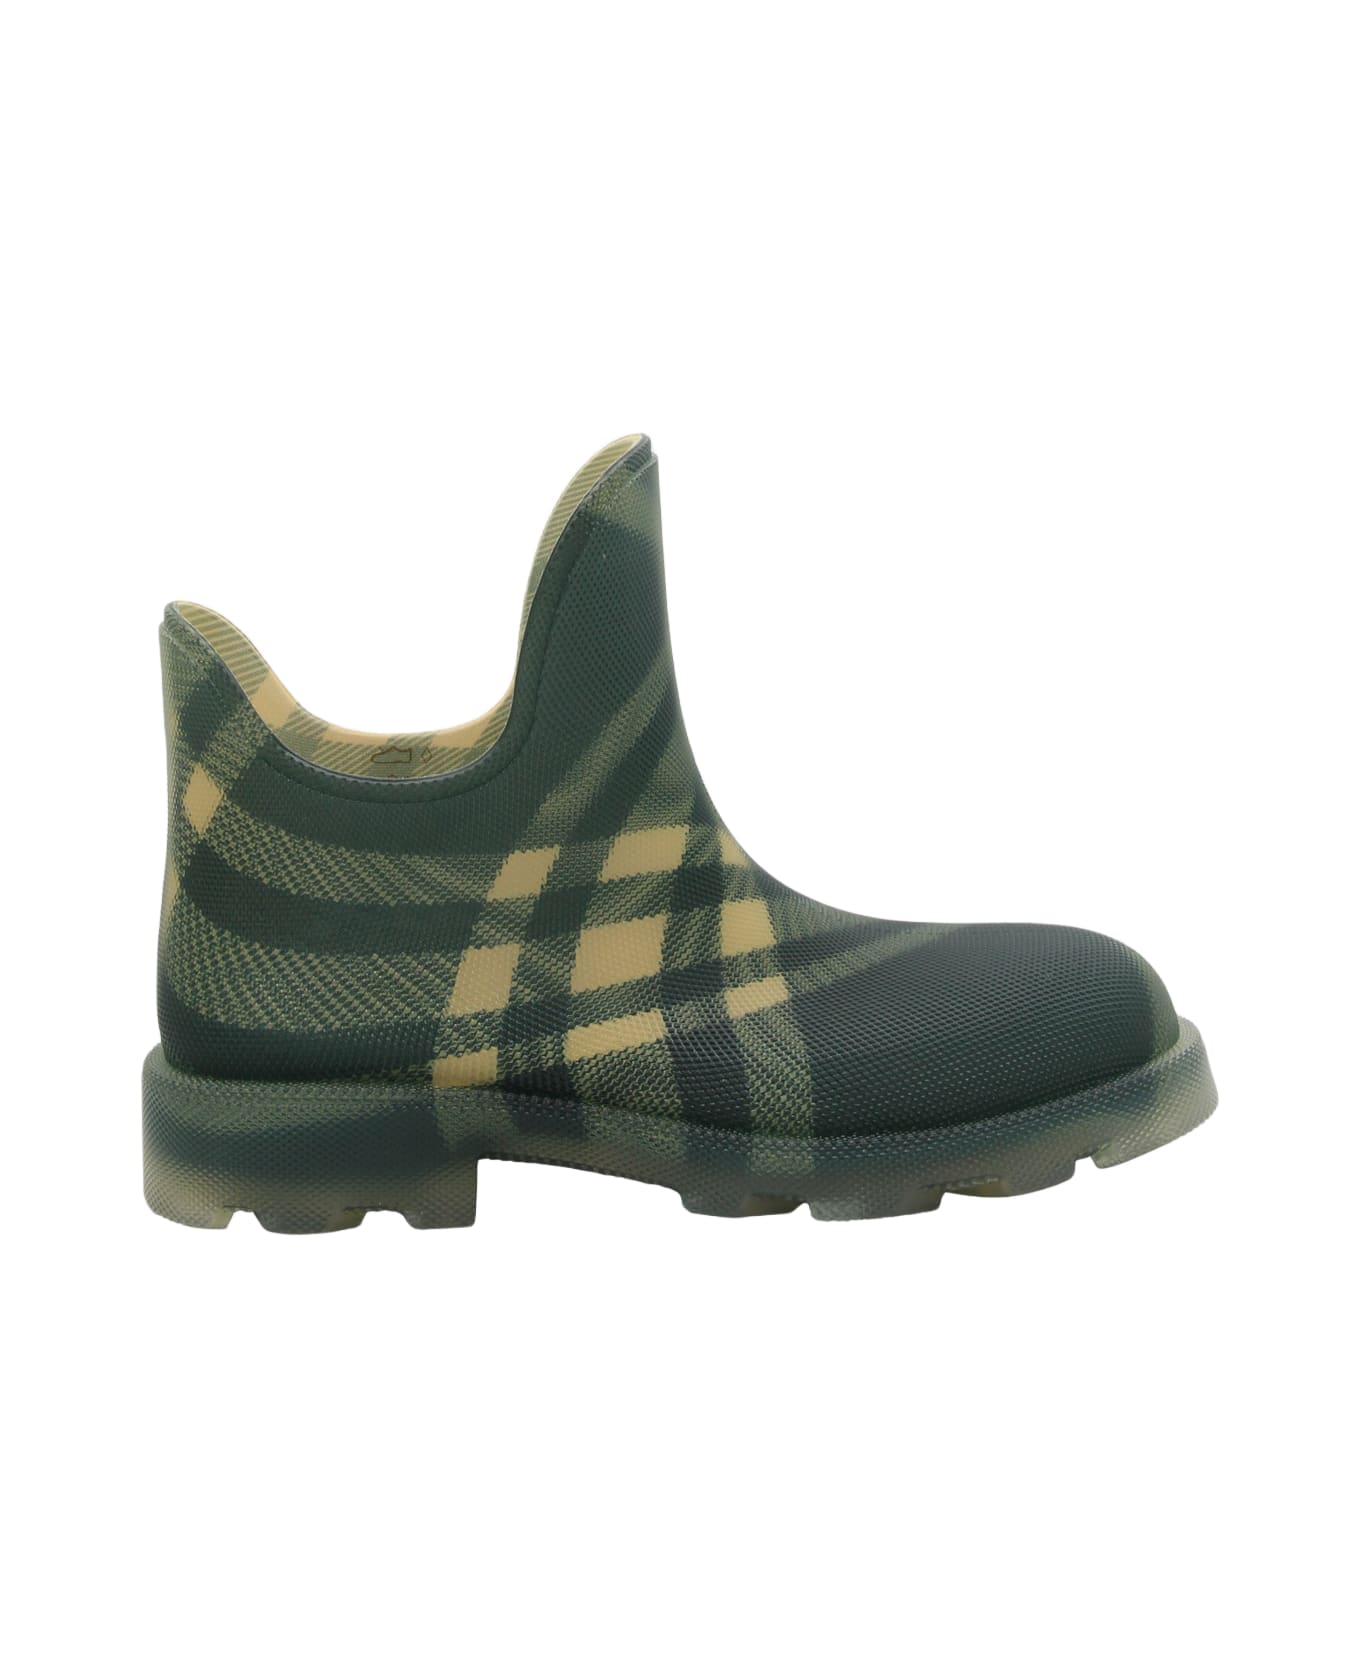 Burberry Green Boots - Fine-tune your instincts in these juniors football boots